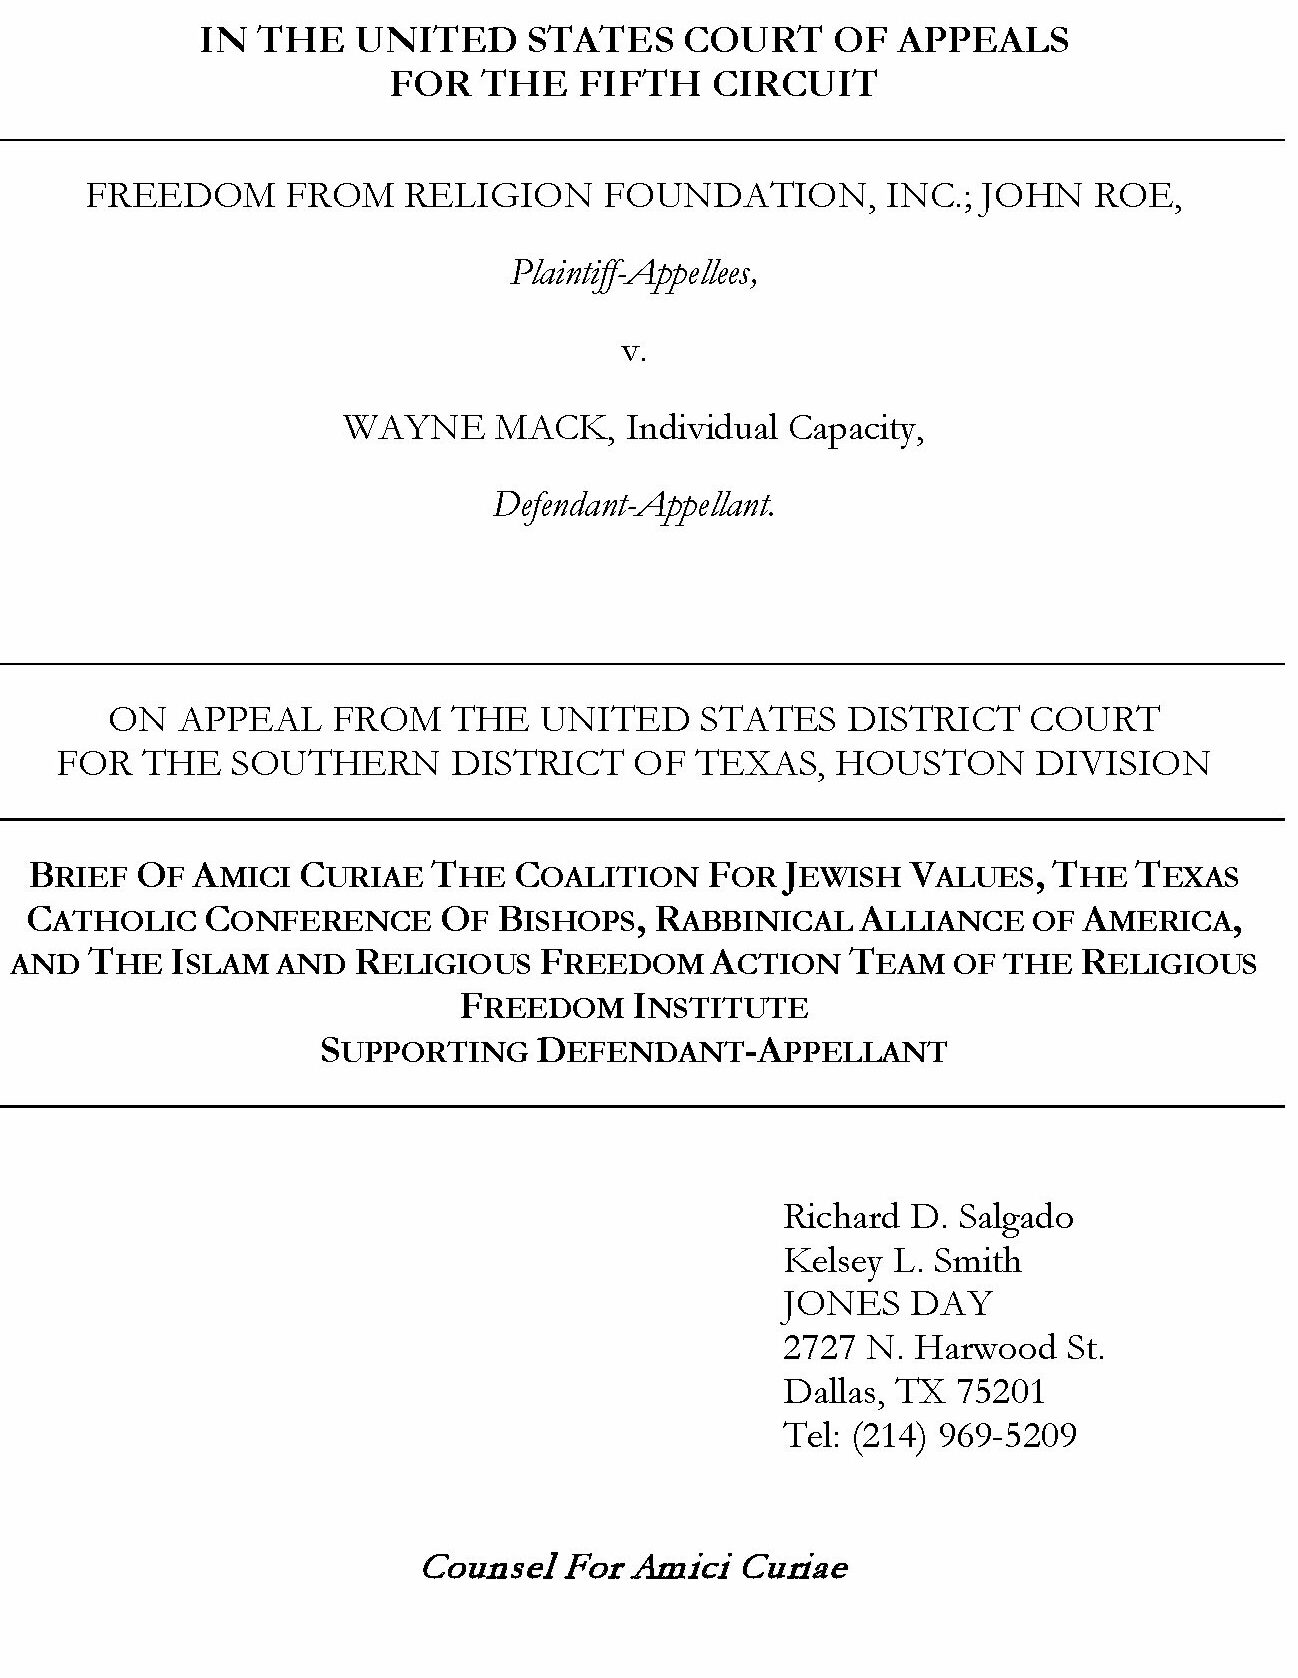 Featured image for “Freedom from Religious Foundation v. Mack”